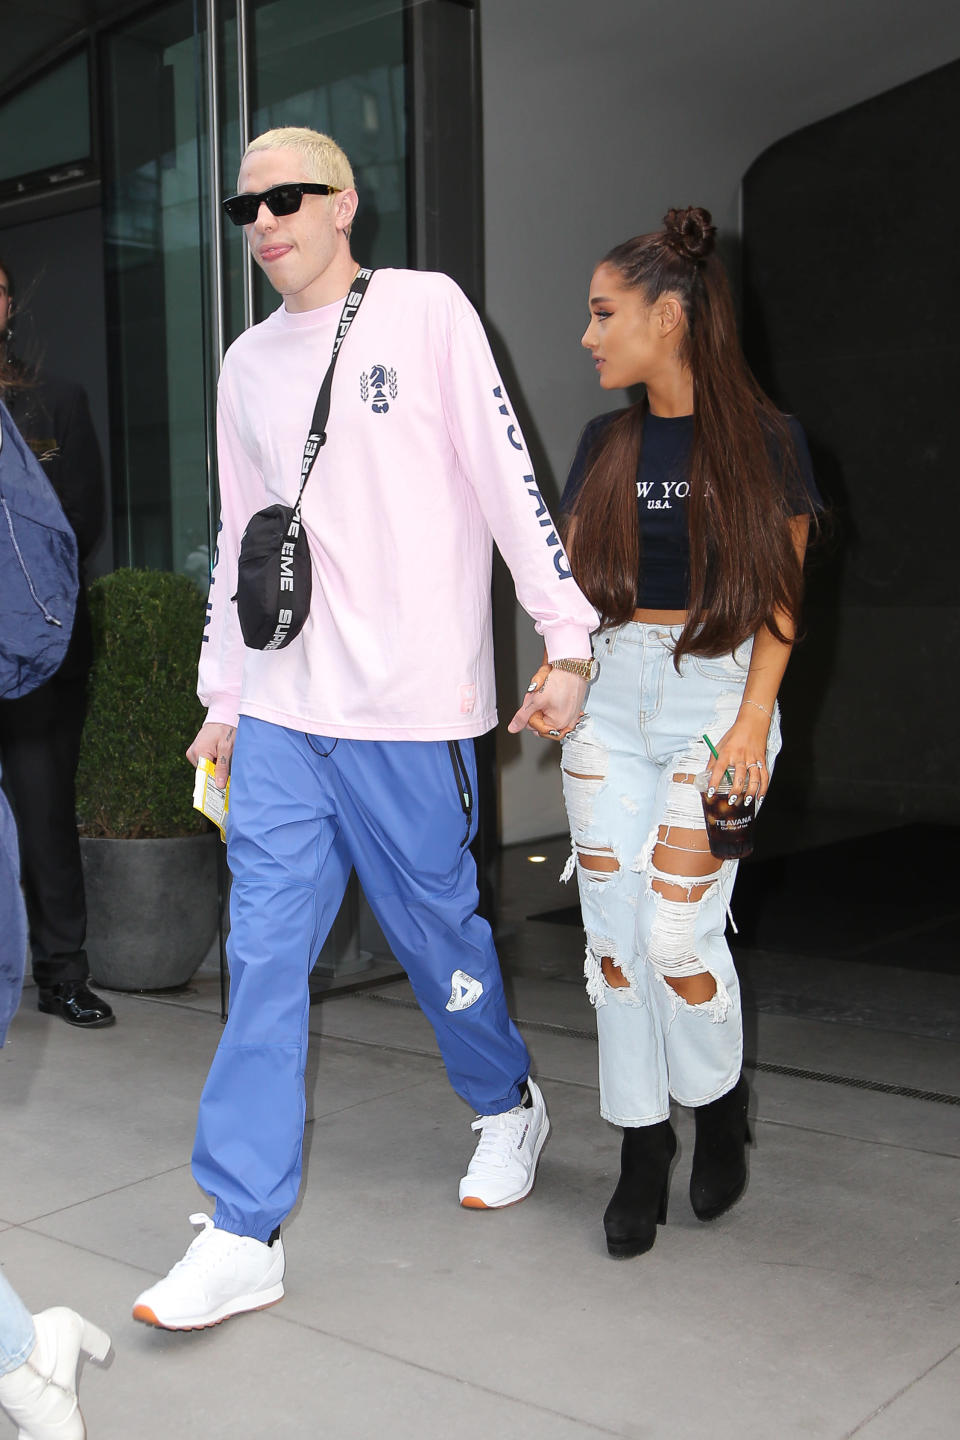 Pete Davidson and Ariana Grande seen coming out from their apartment in NYC on July 11, 2018. - Credit: MEGA